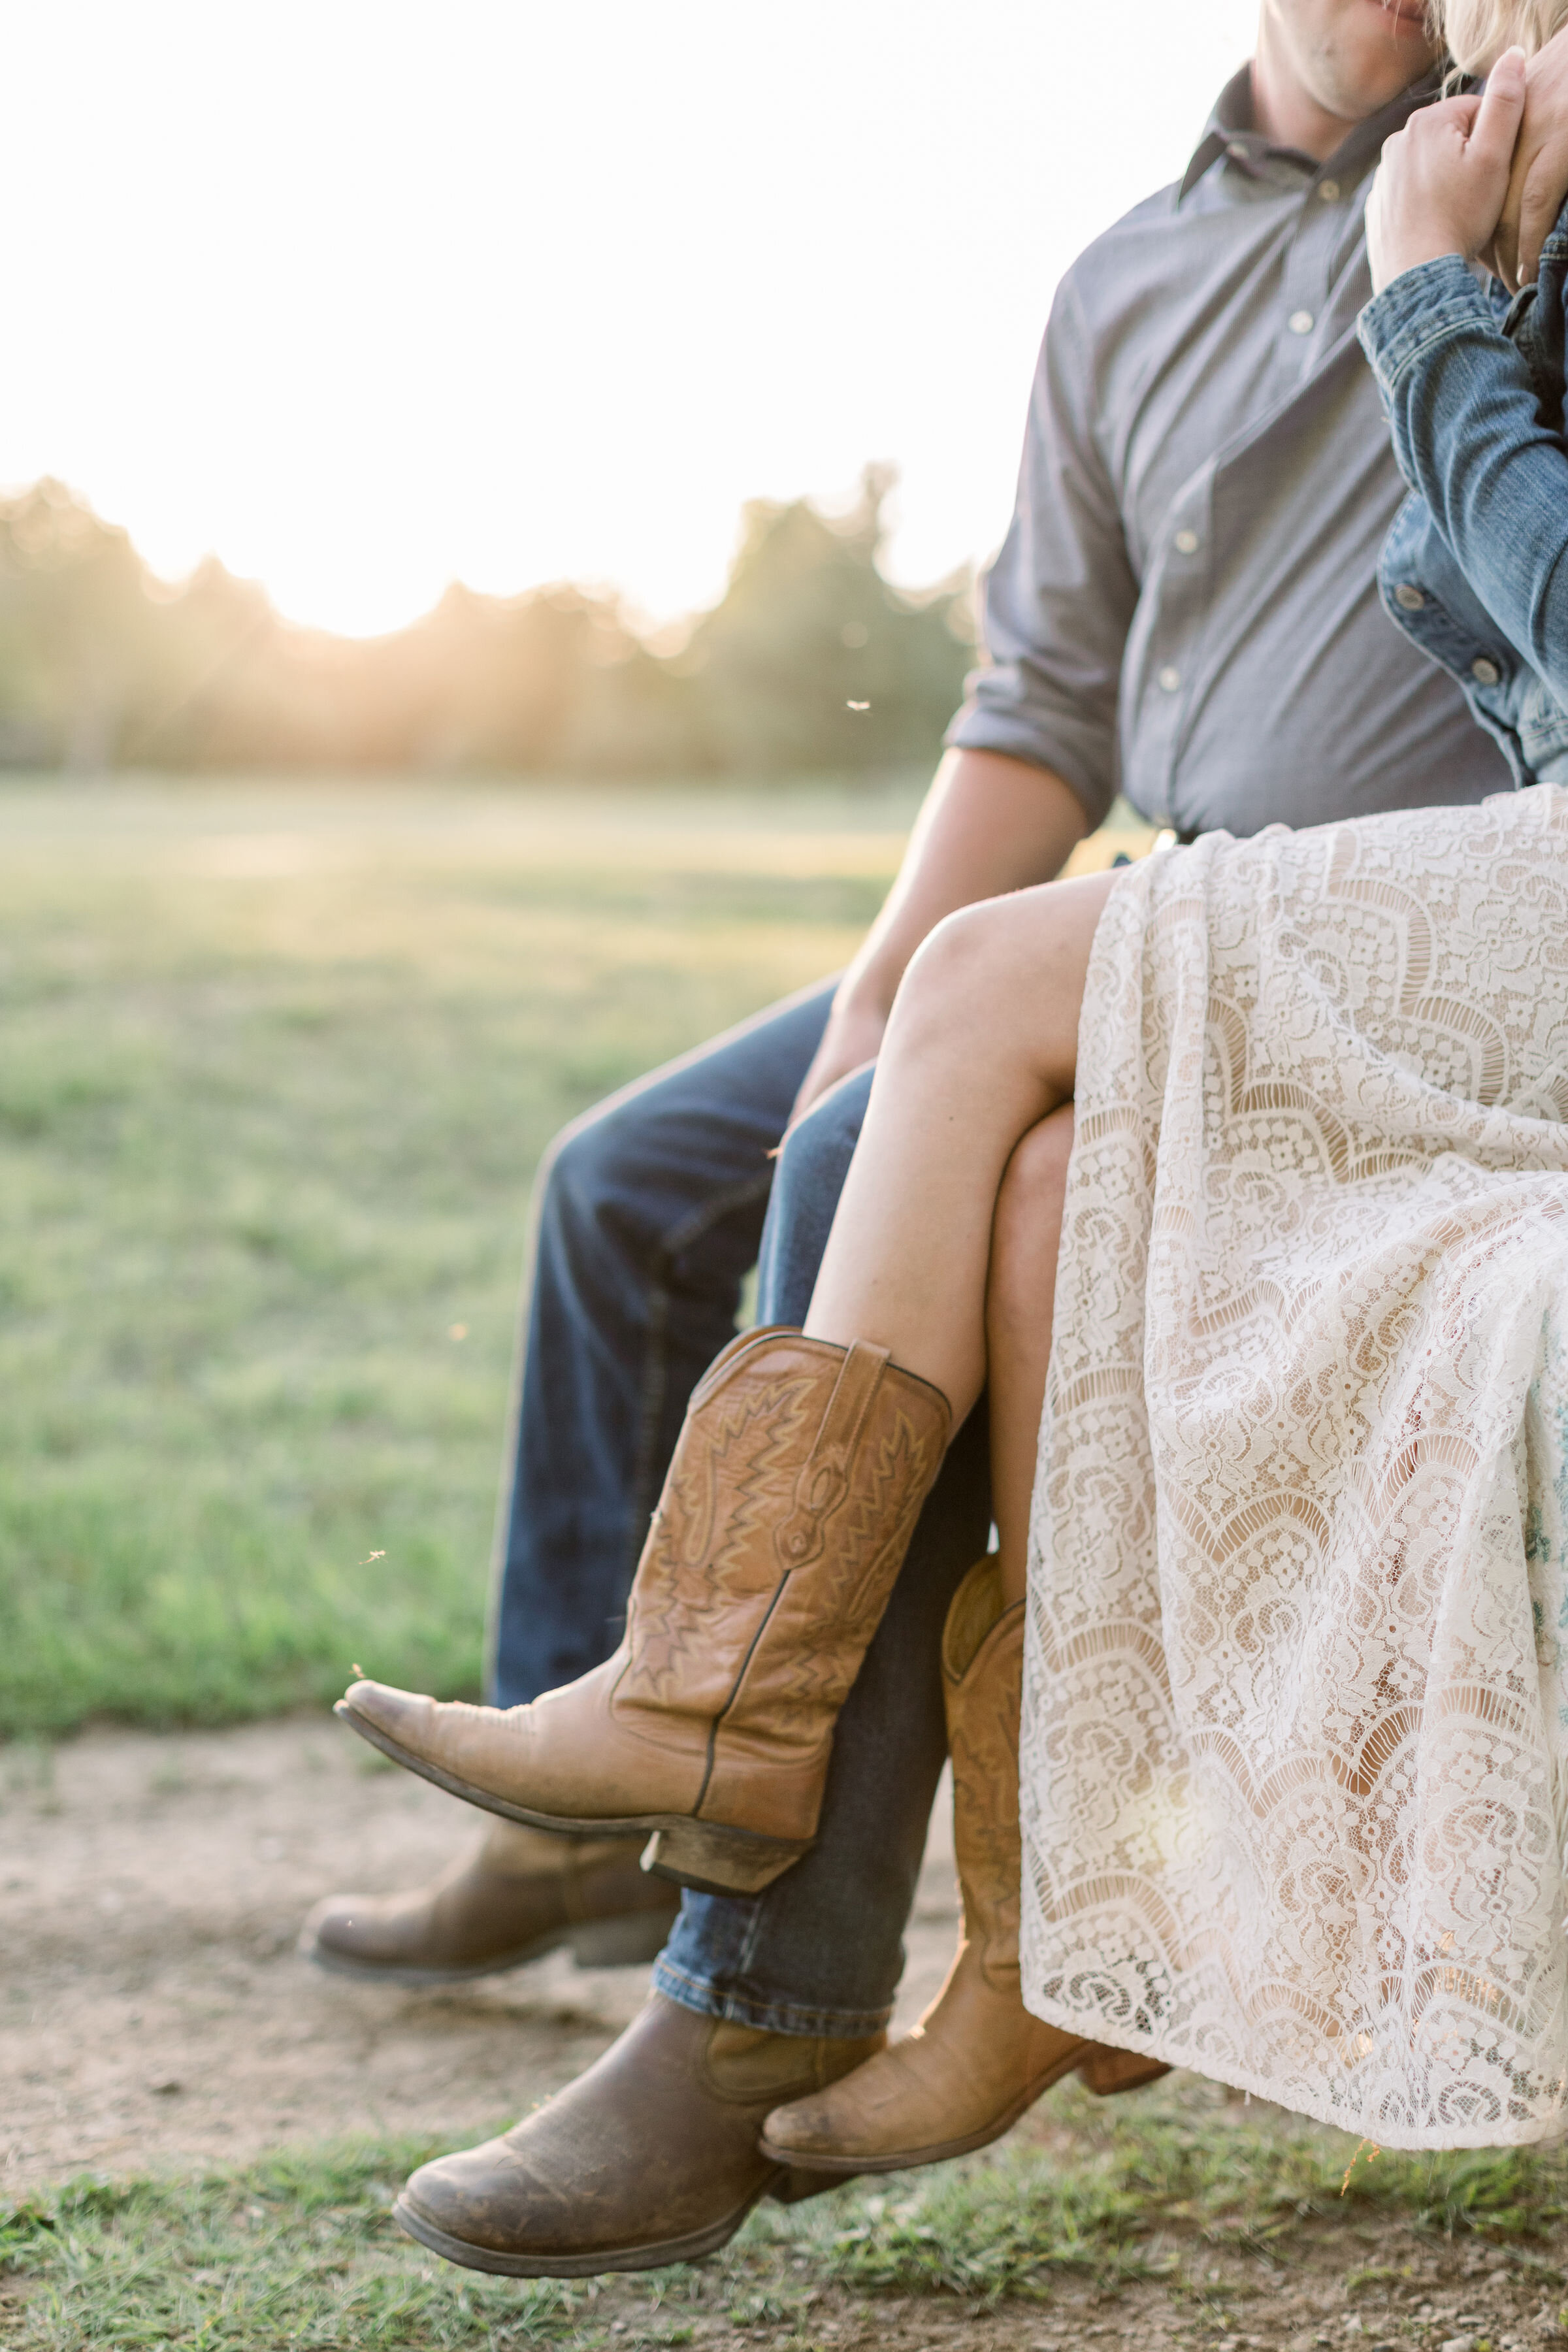  Ottawa, Canada photographer, Chelsea Mason photography captures this close up photo of this engaged couple sitting in the bed of this vintage Ford pickup truck during their engagement session. southern styled engagement outfit ford pickup truck #Che